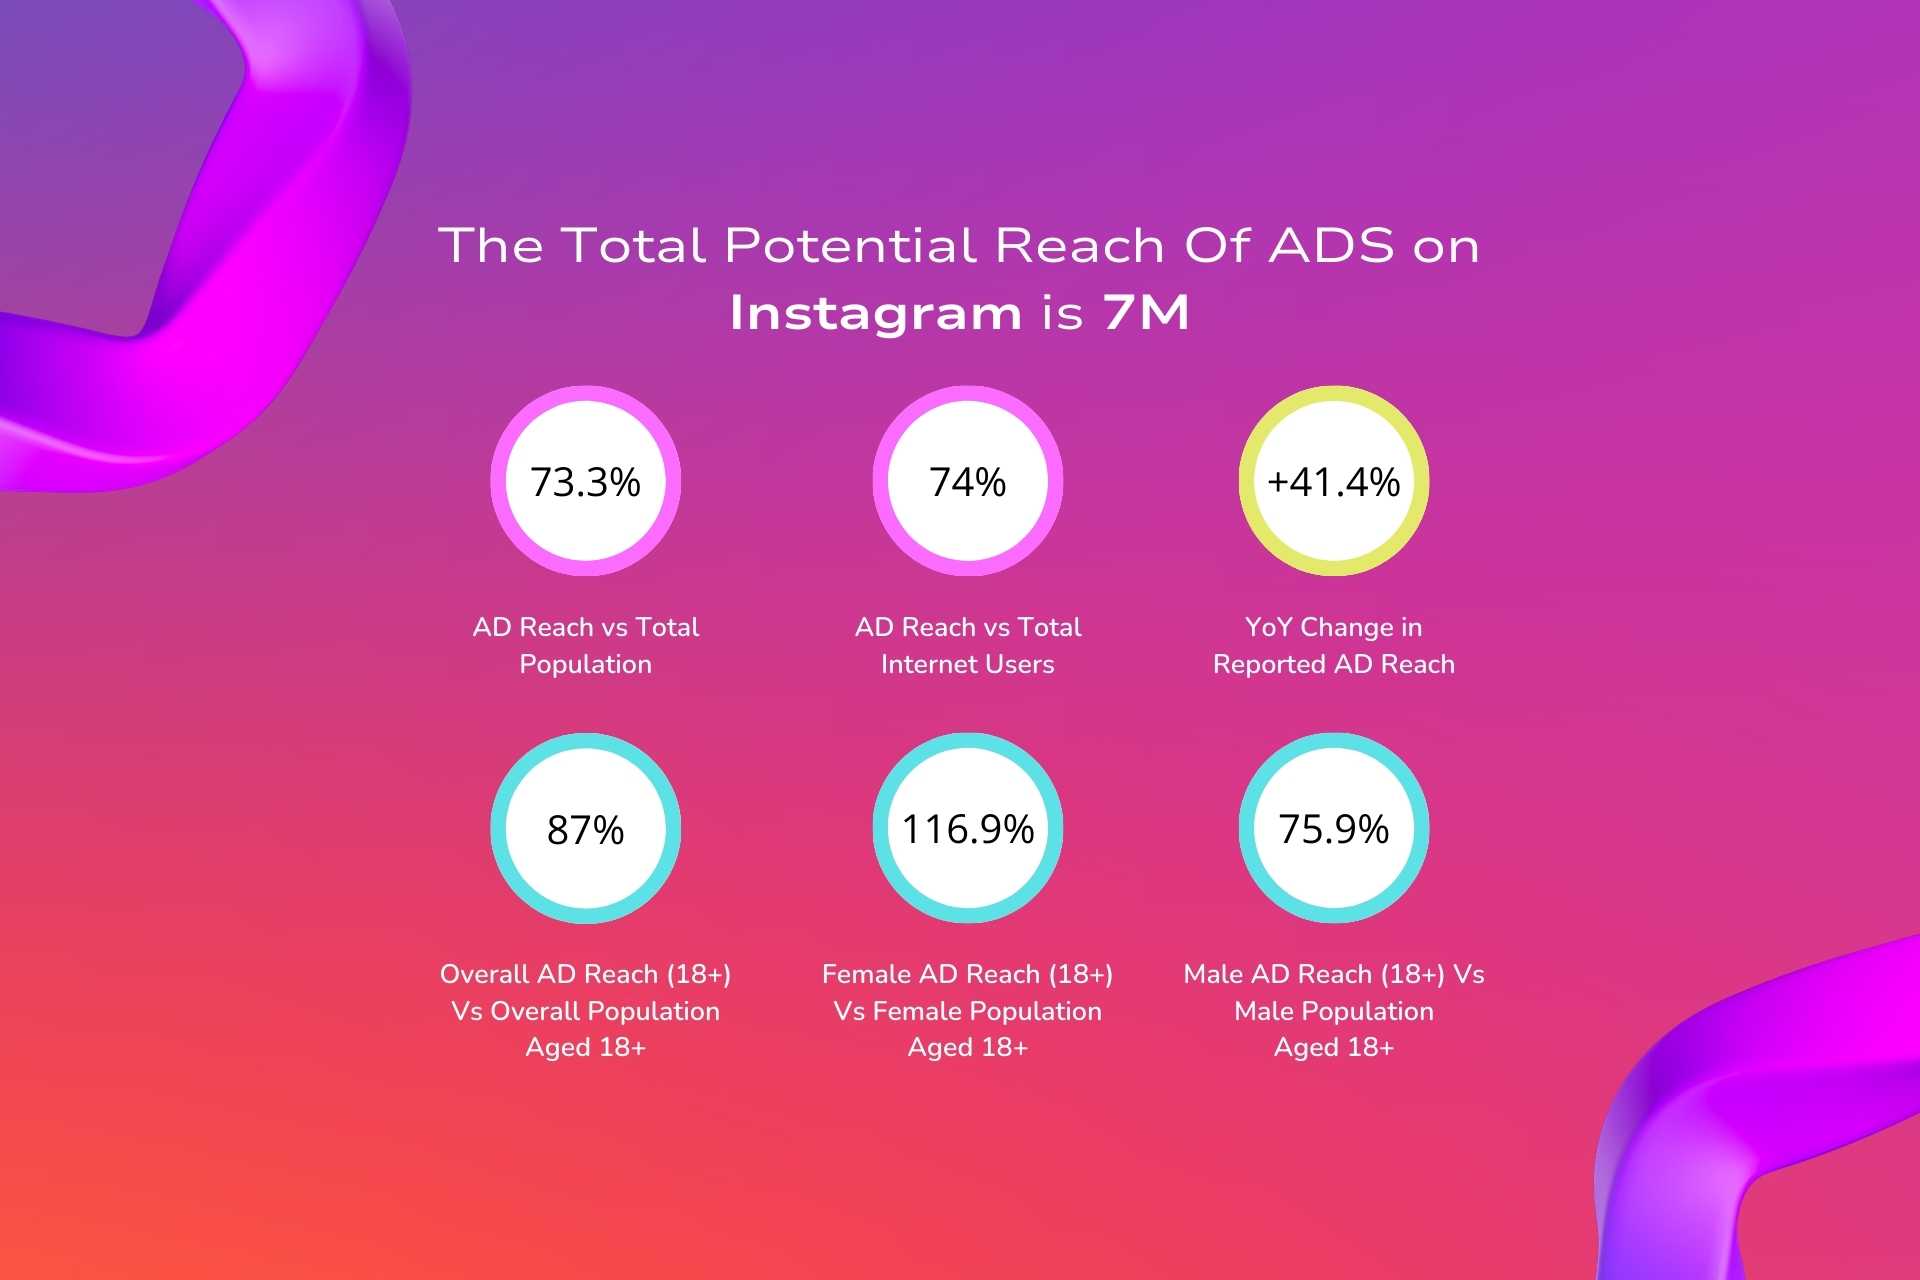 Growth of Social Media in the UAE -ADS on Instagram